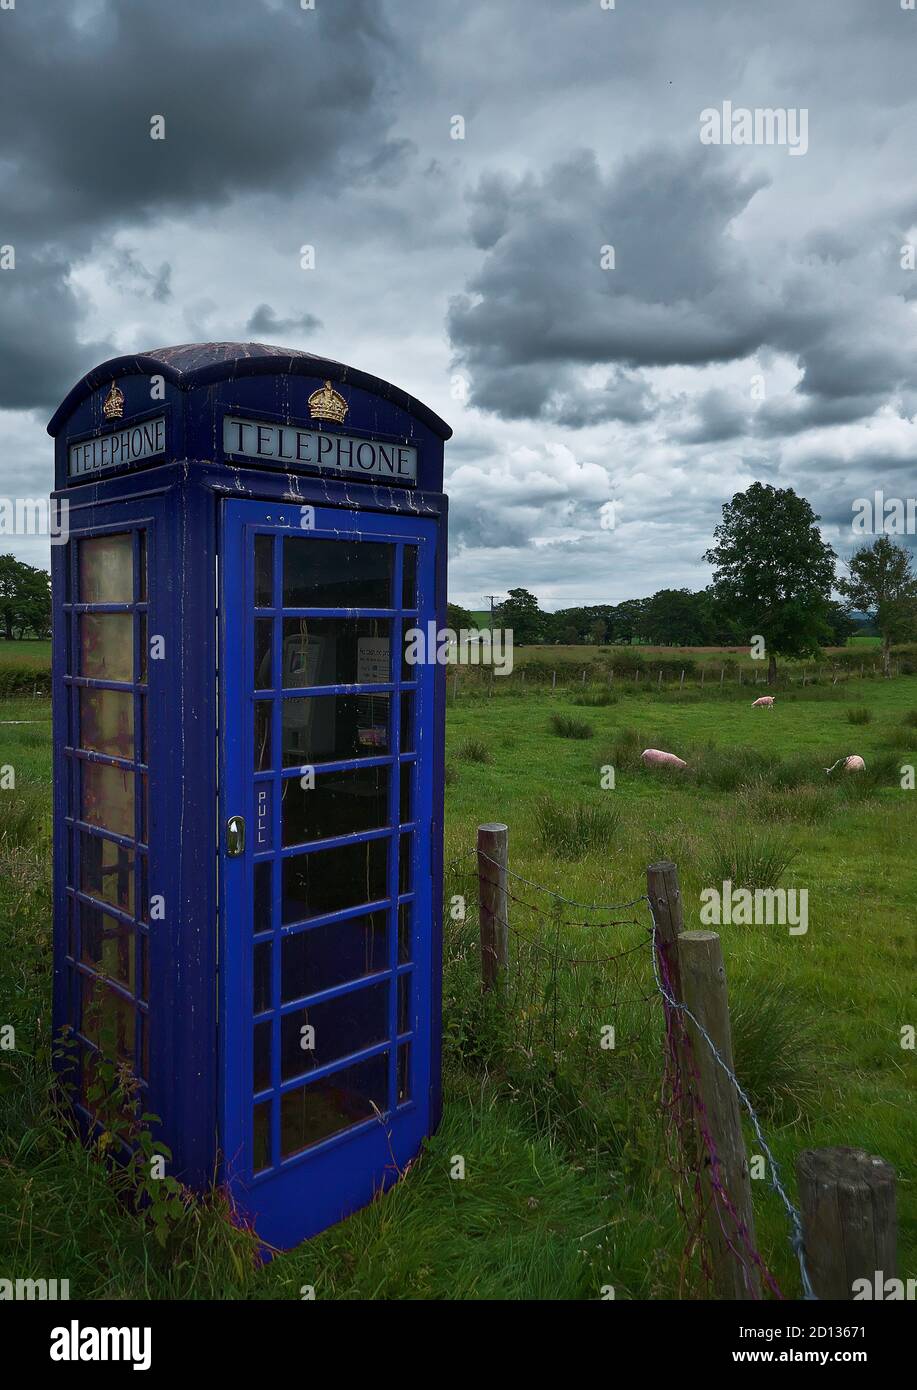 Incongruous and Magritte like bright blue typical British UK phone telephone phone box surreal in middle of field full of sheep Stock Photo